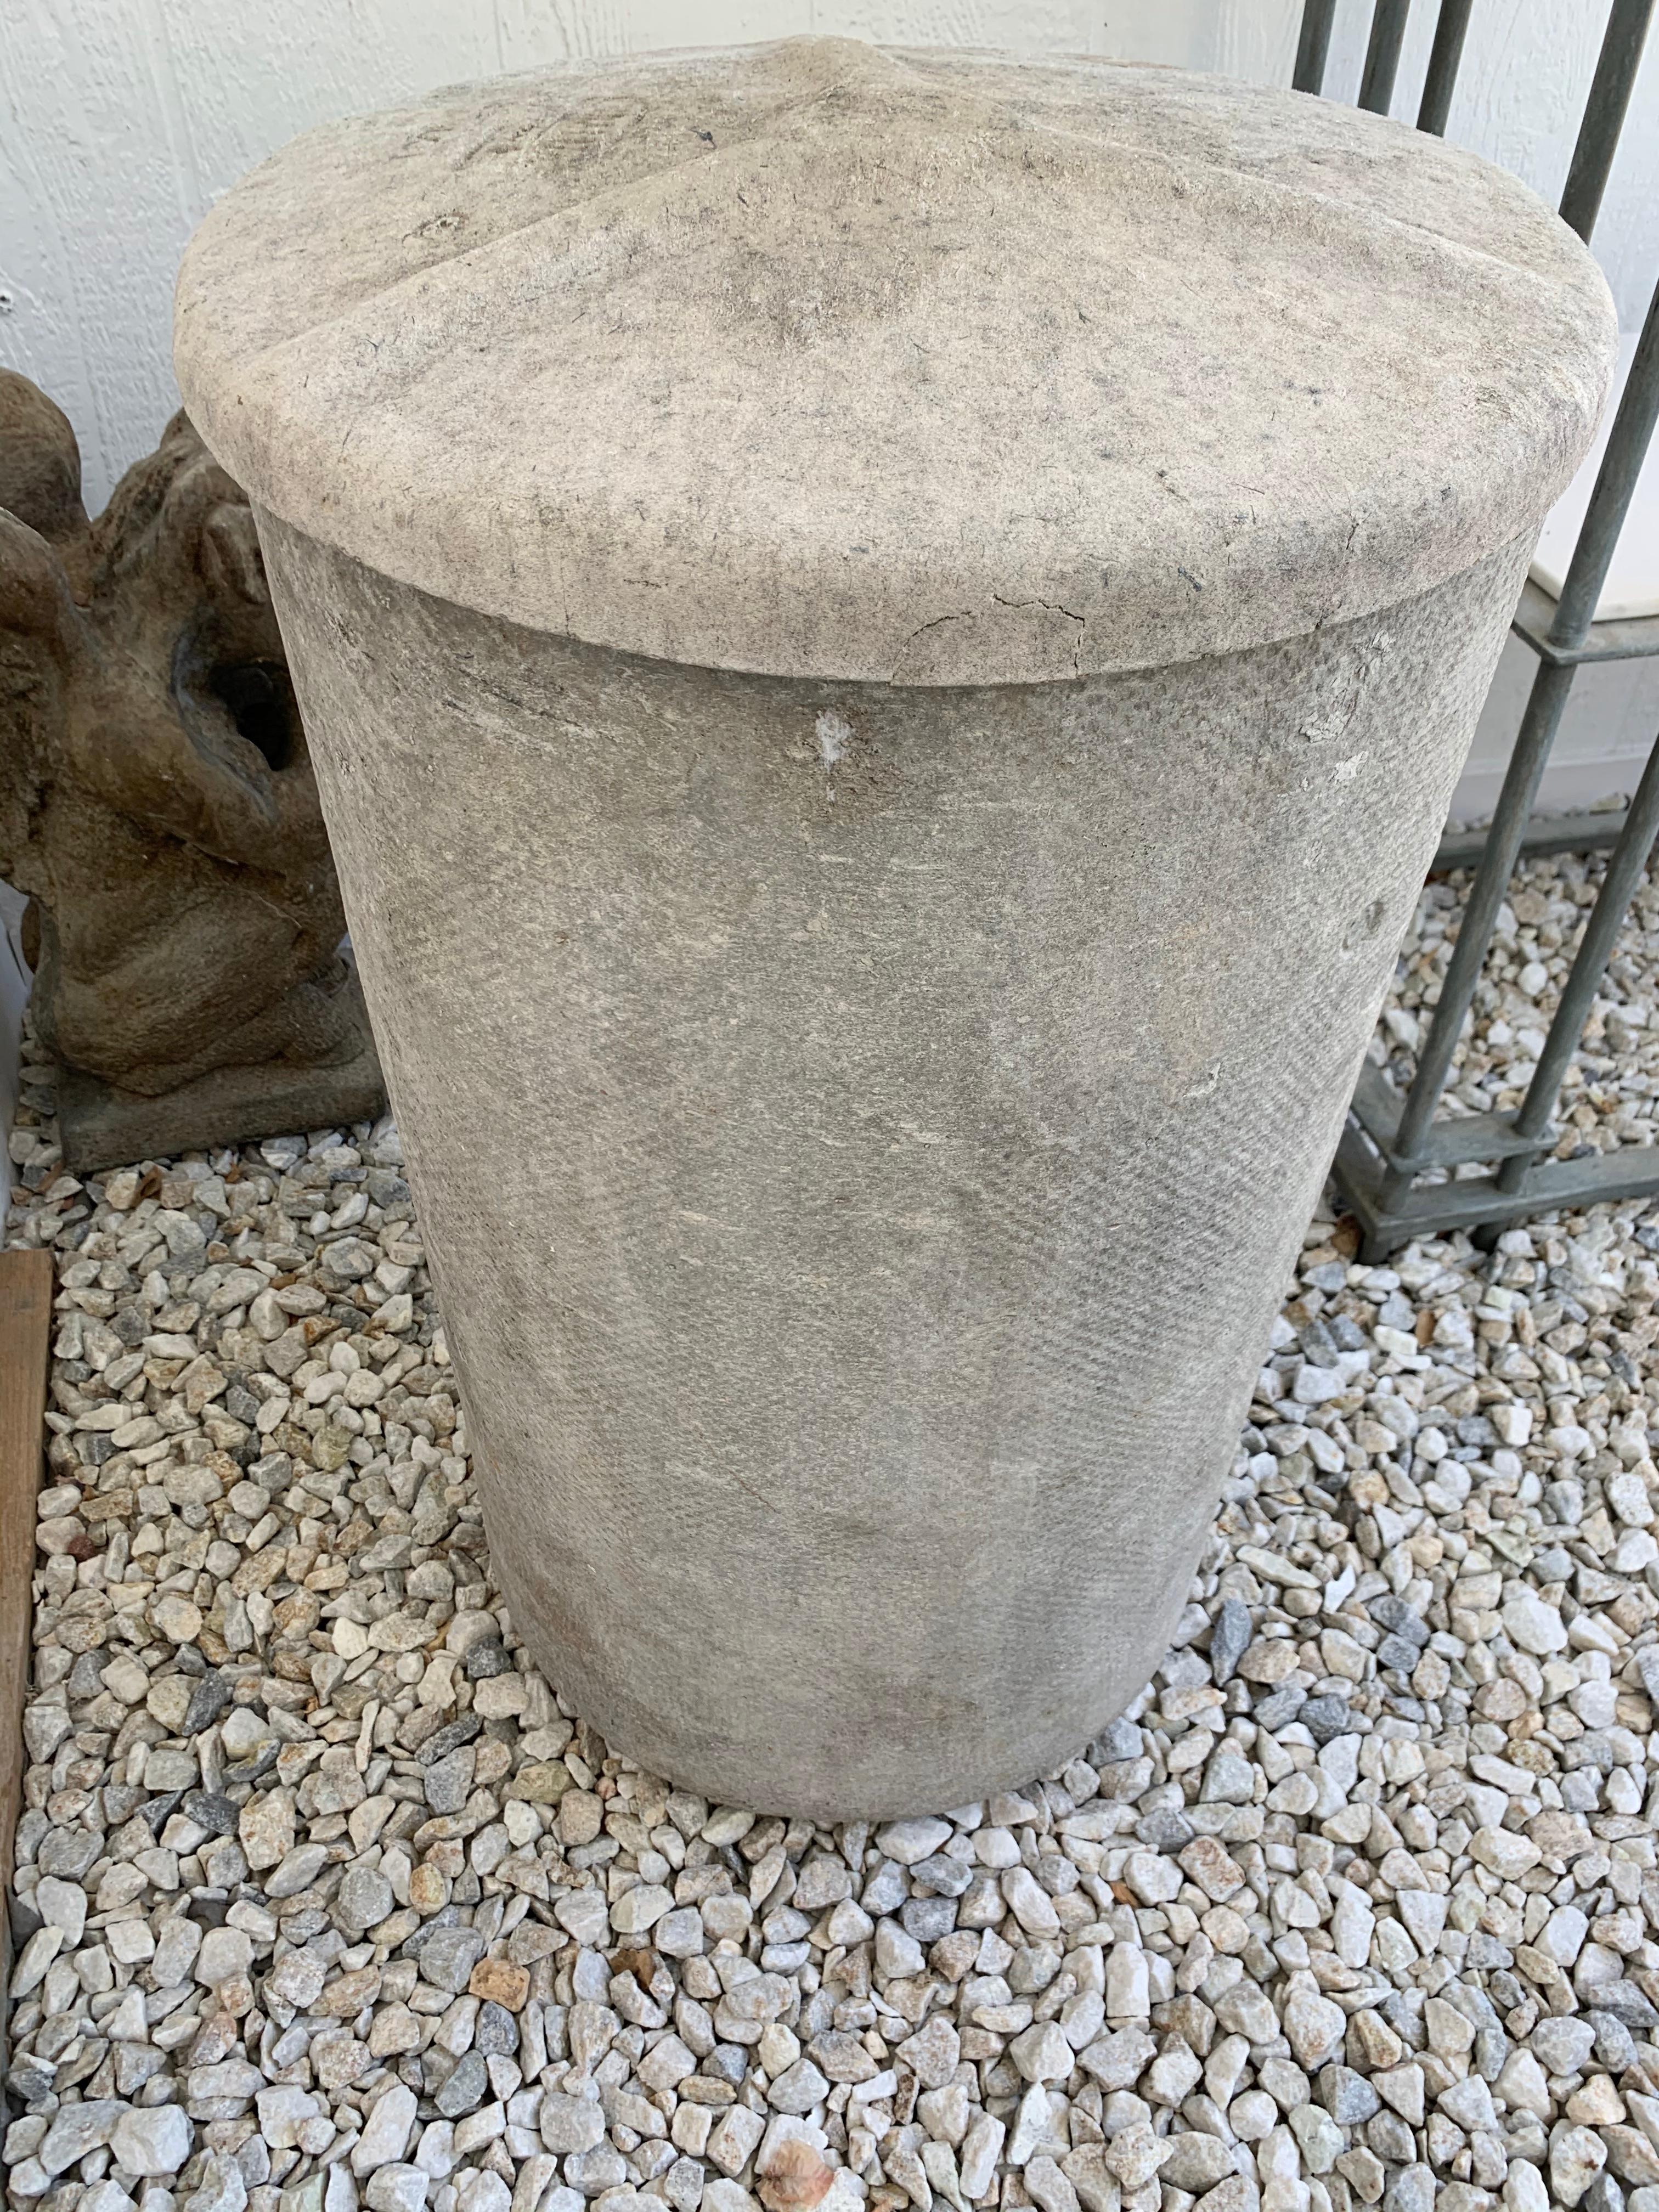 Unique trash can in the style of Willy Guhl. Made by Uralite in the 1950s. Manufactured in the UK. Just over 2.5 feet tall. Consists of lightweight fiber cement. Large bin with lid. A few small cracks to lid. Good vintage condition. Great